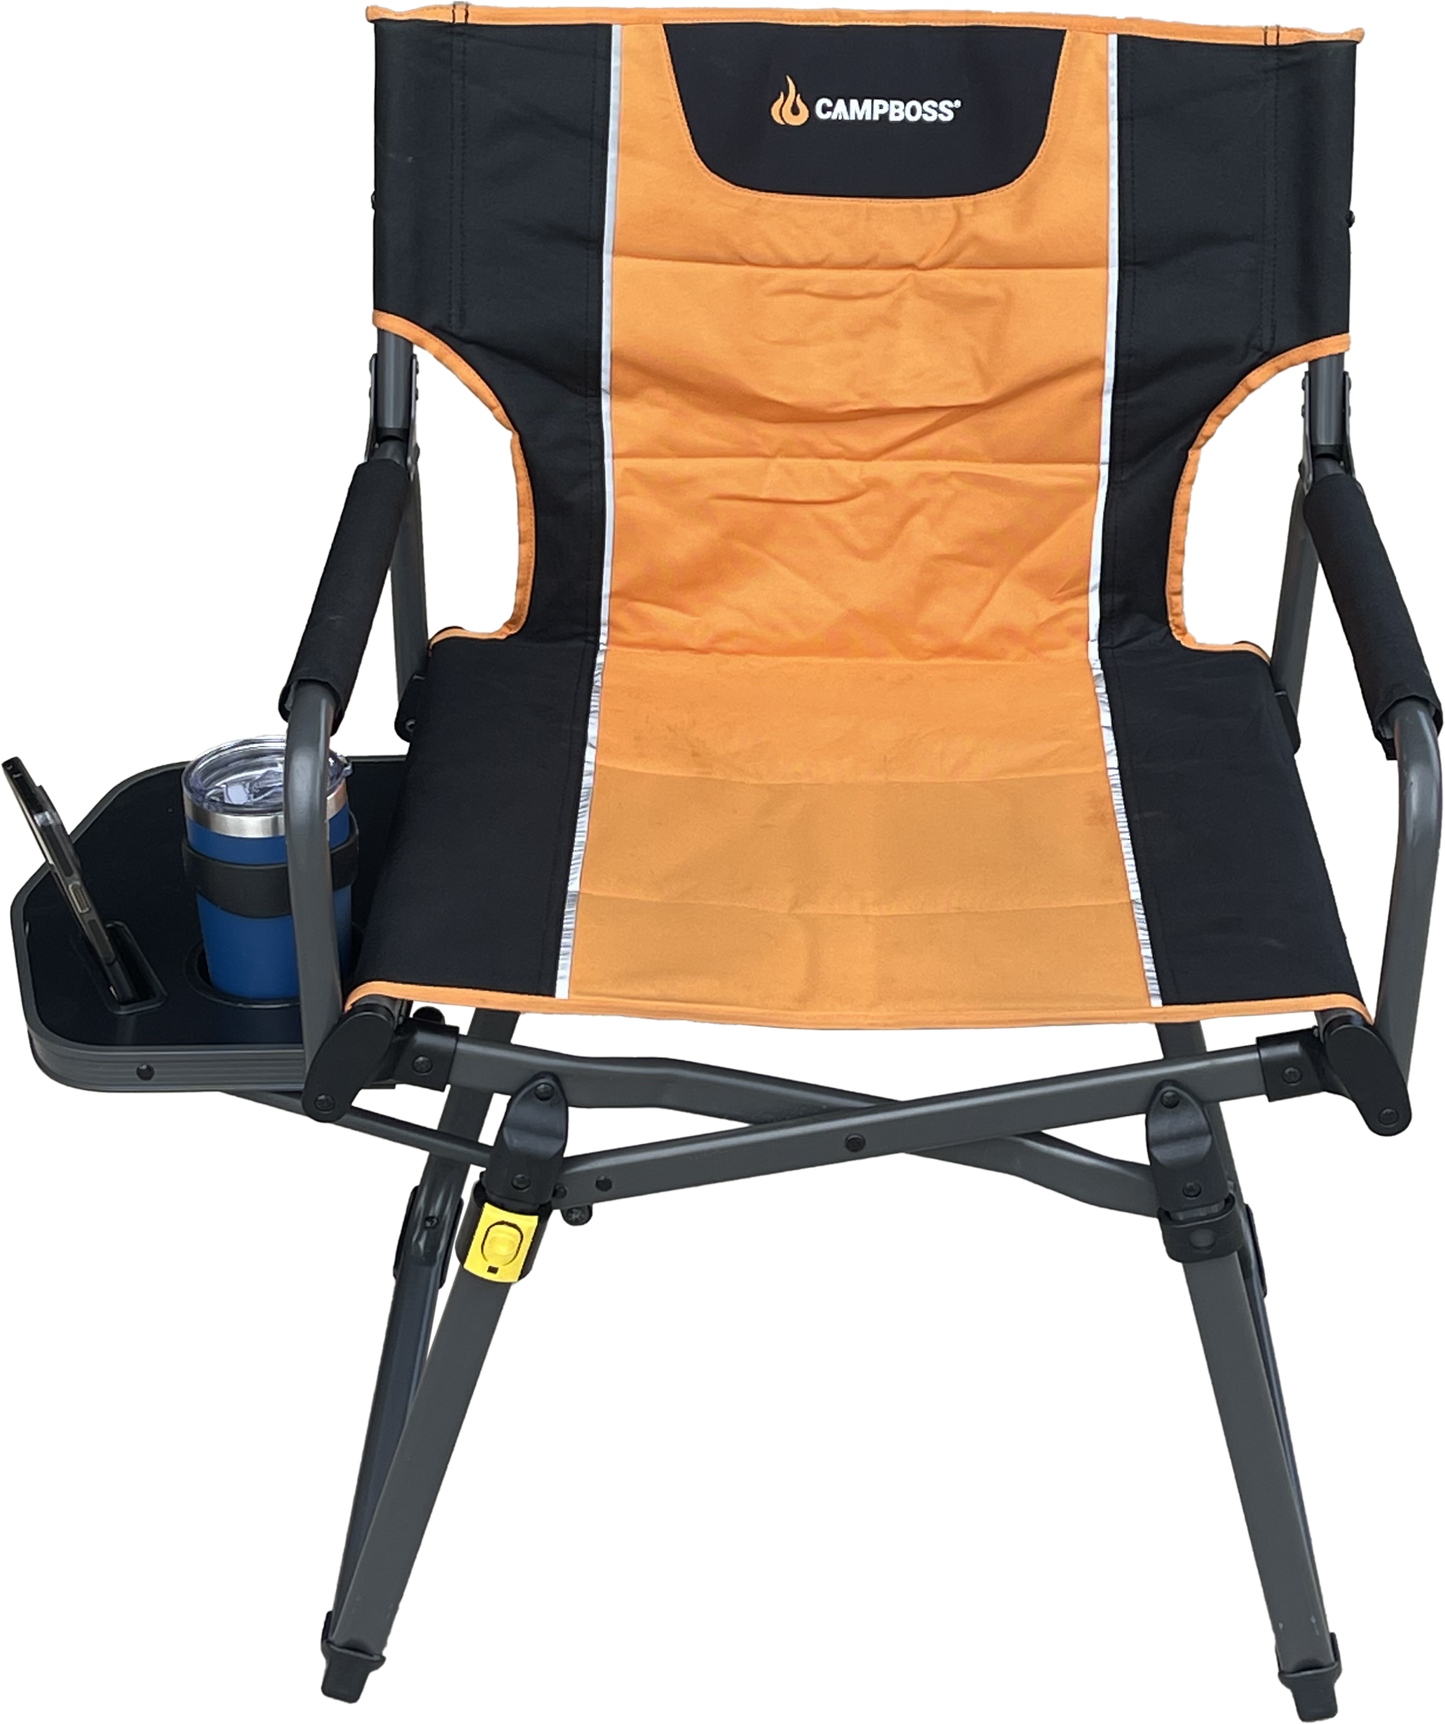 Campboss The Drysdale Camp Chair